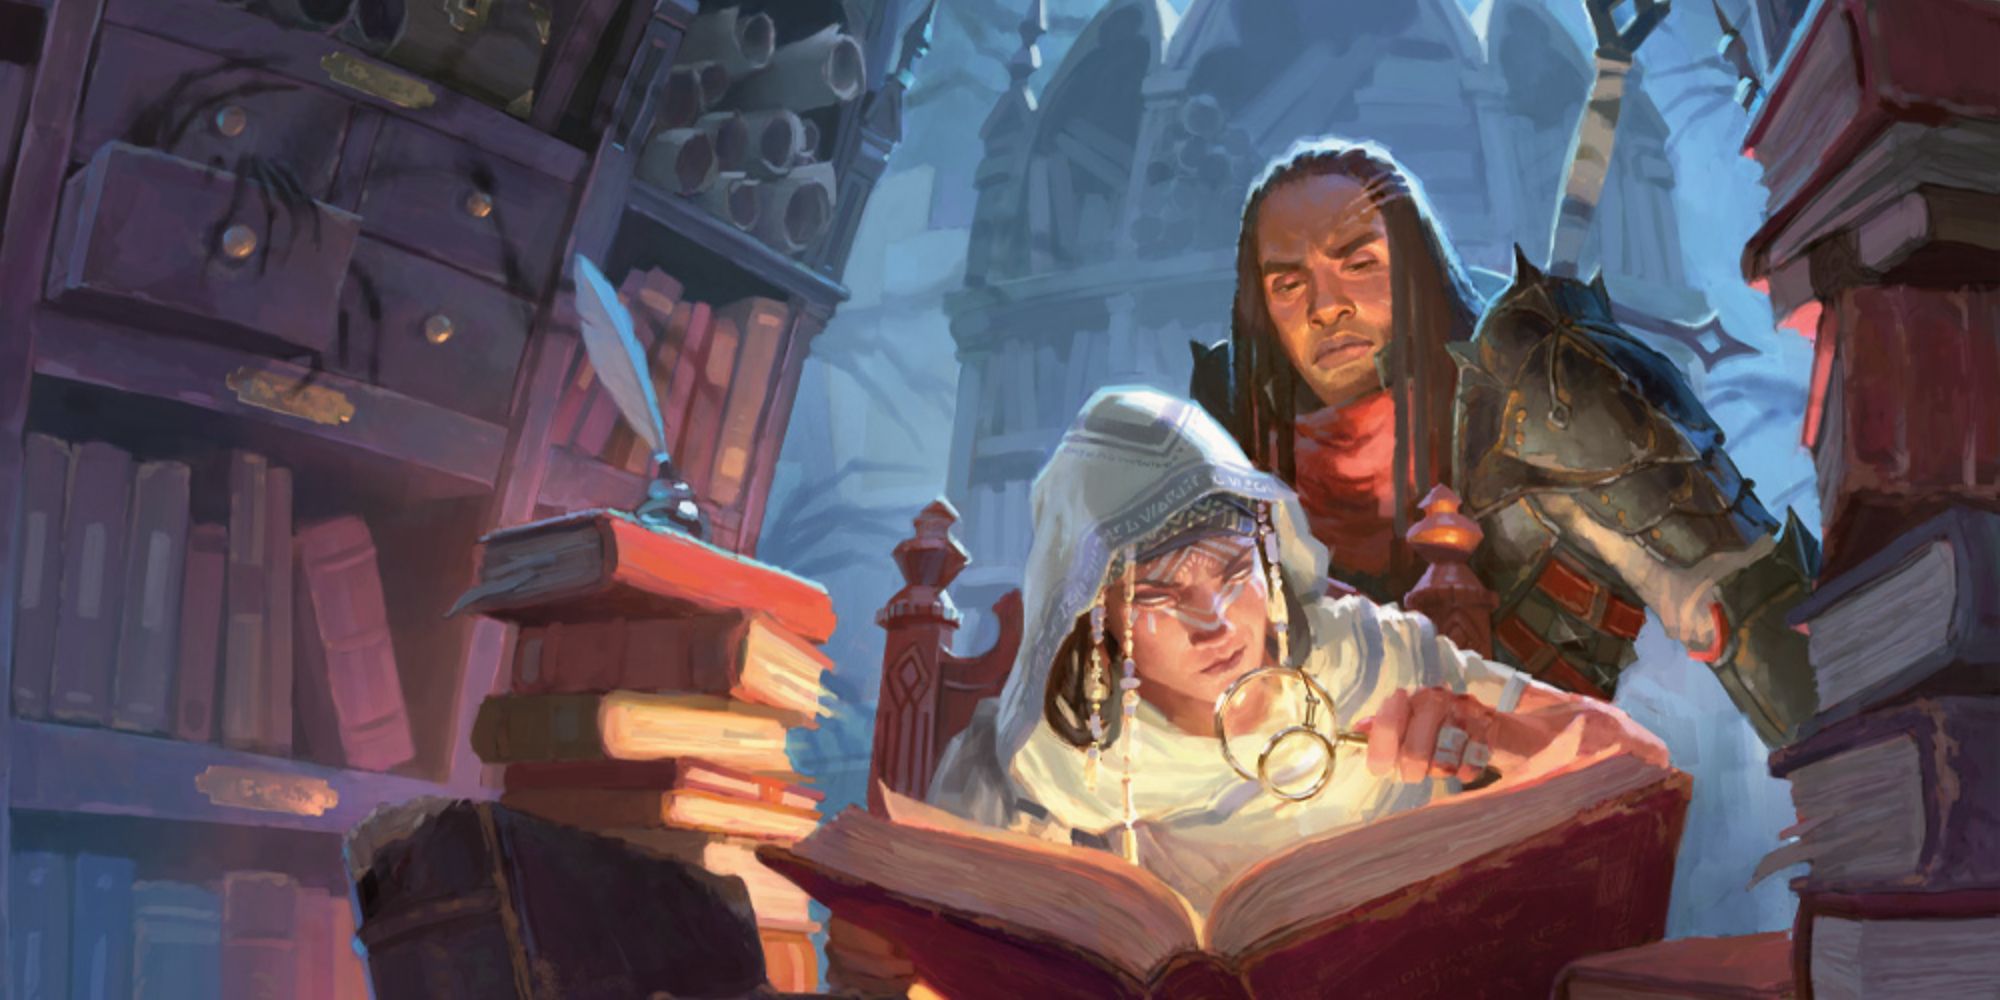 Two figures look over a glowing book in a library from Dungeons and Dragons